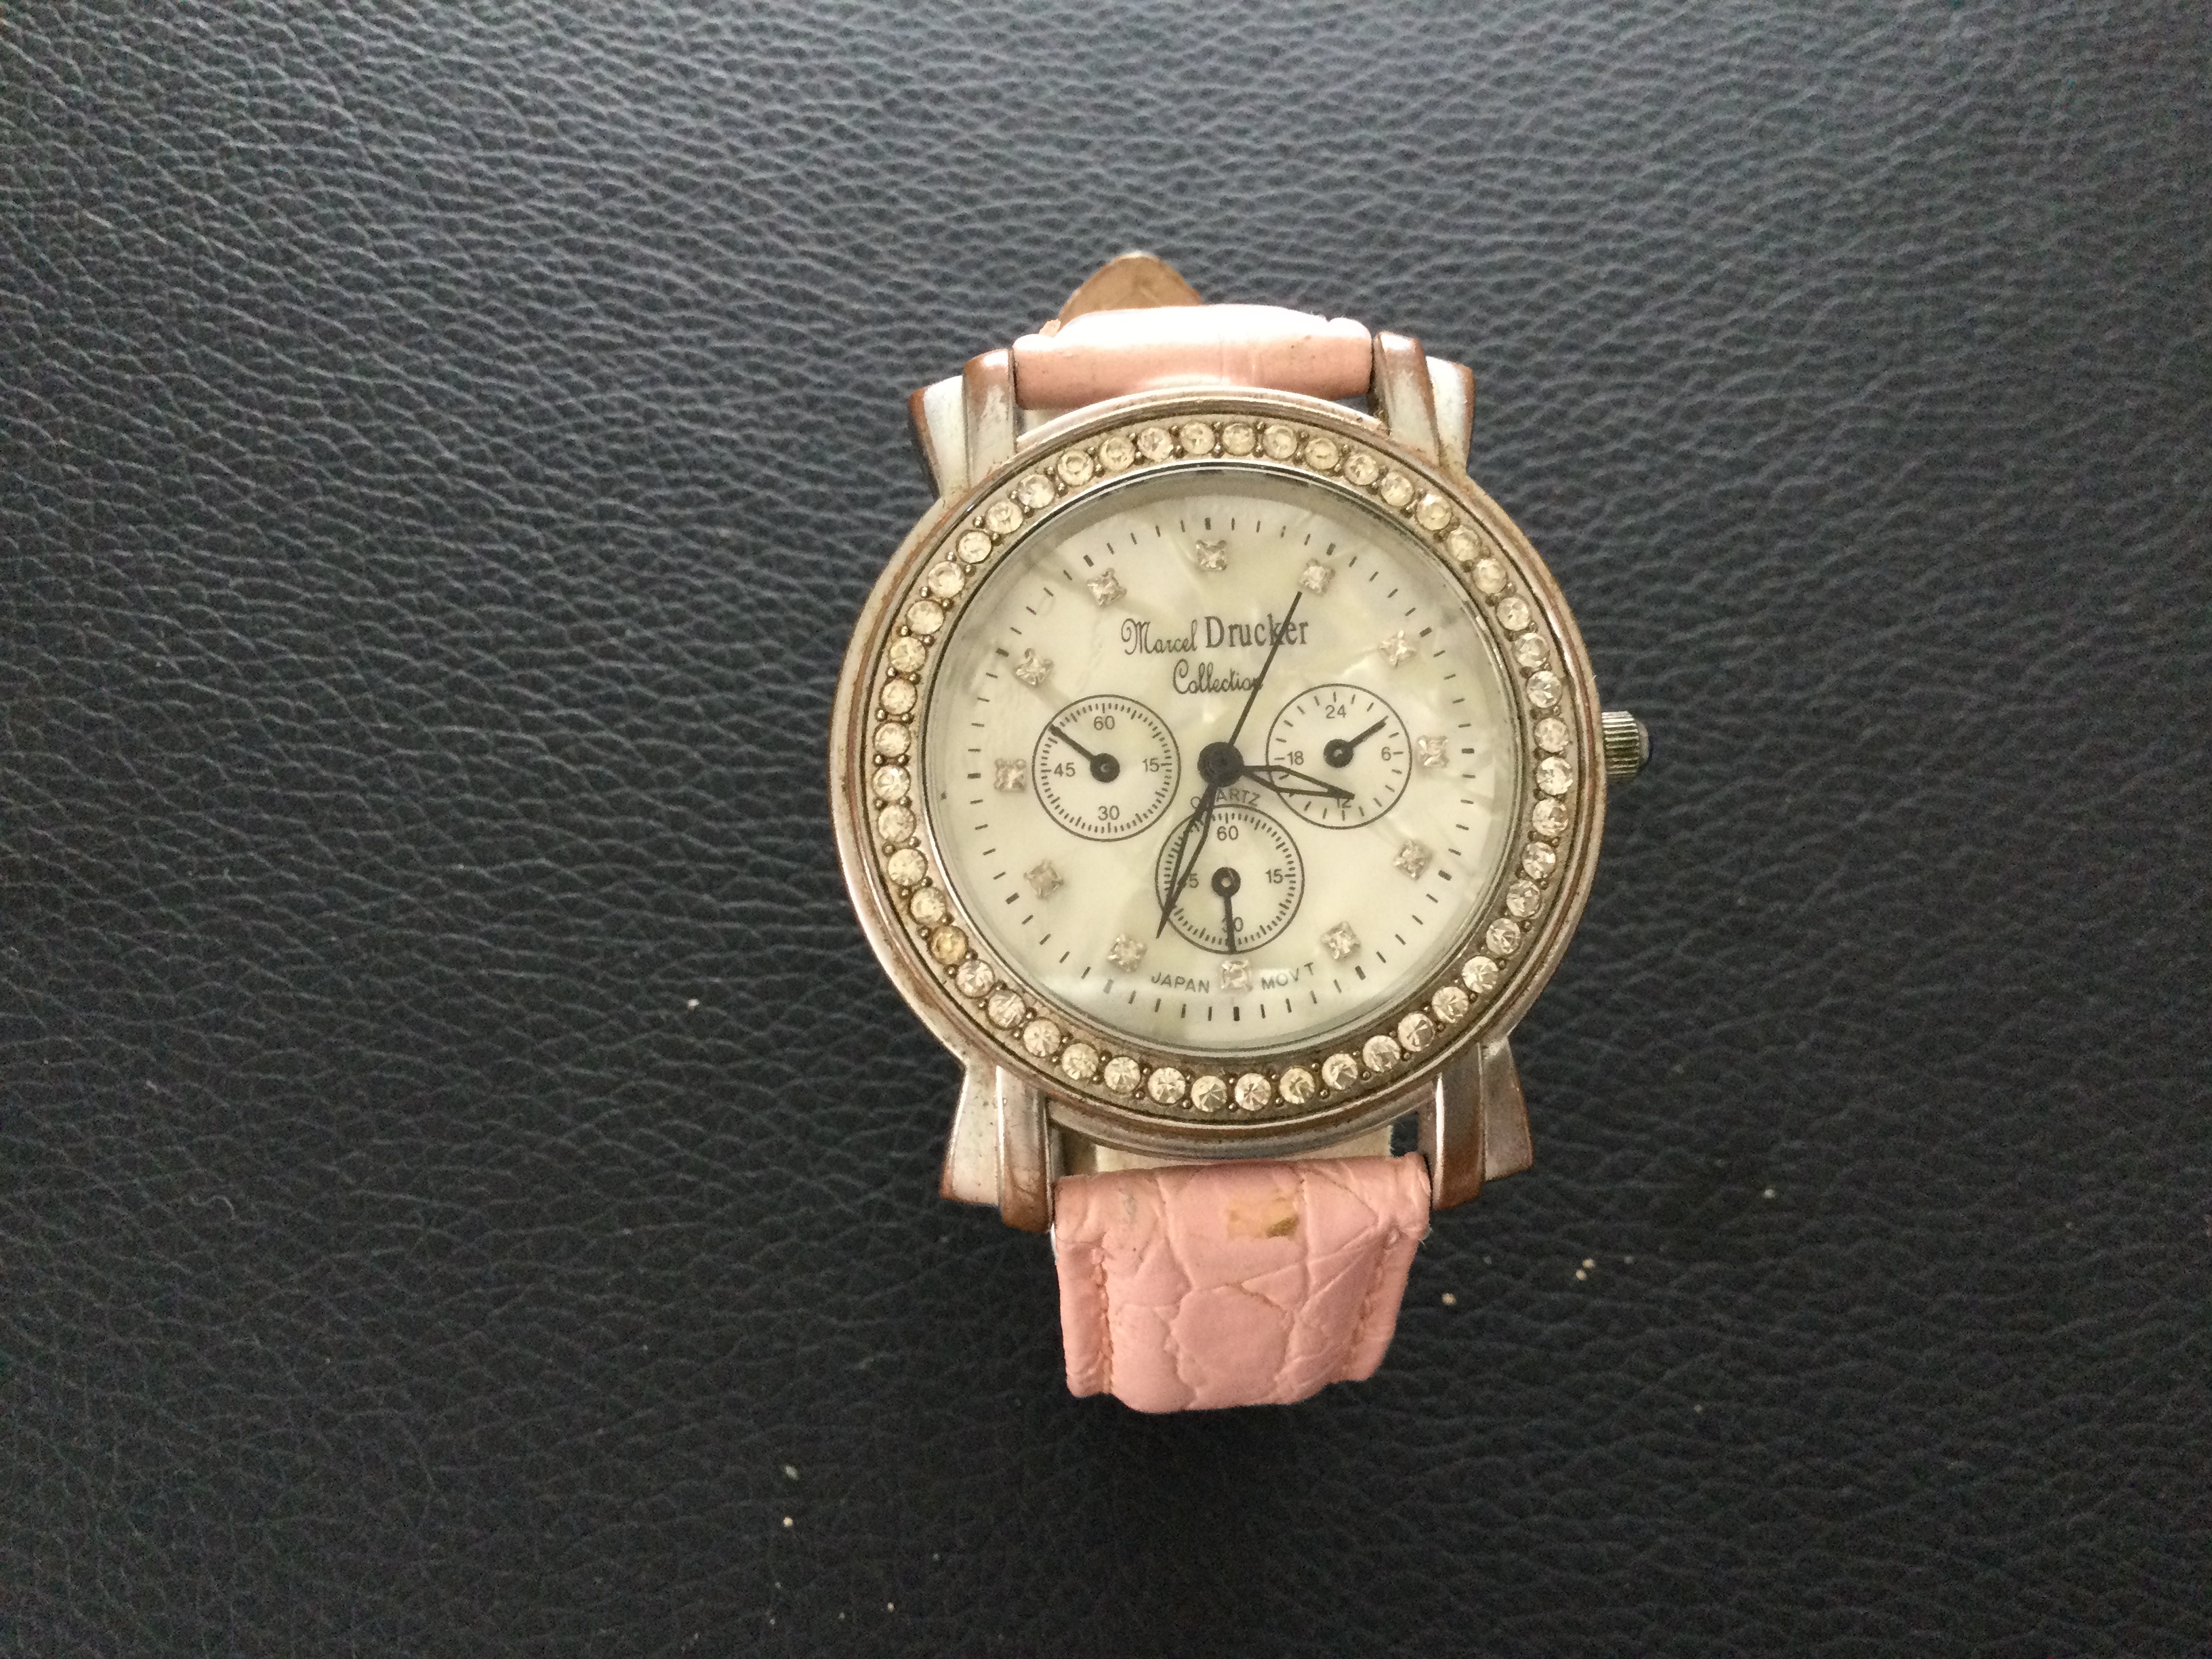 Lovely Crystal Marcel Drucker with Pink Leather Strap (GS 130) From the beautiful Marcel Drucker - Image 3 of 5